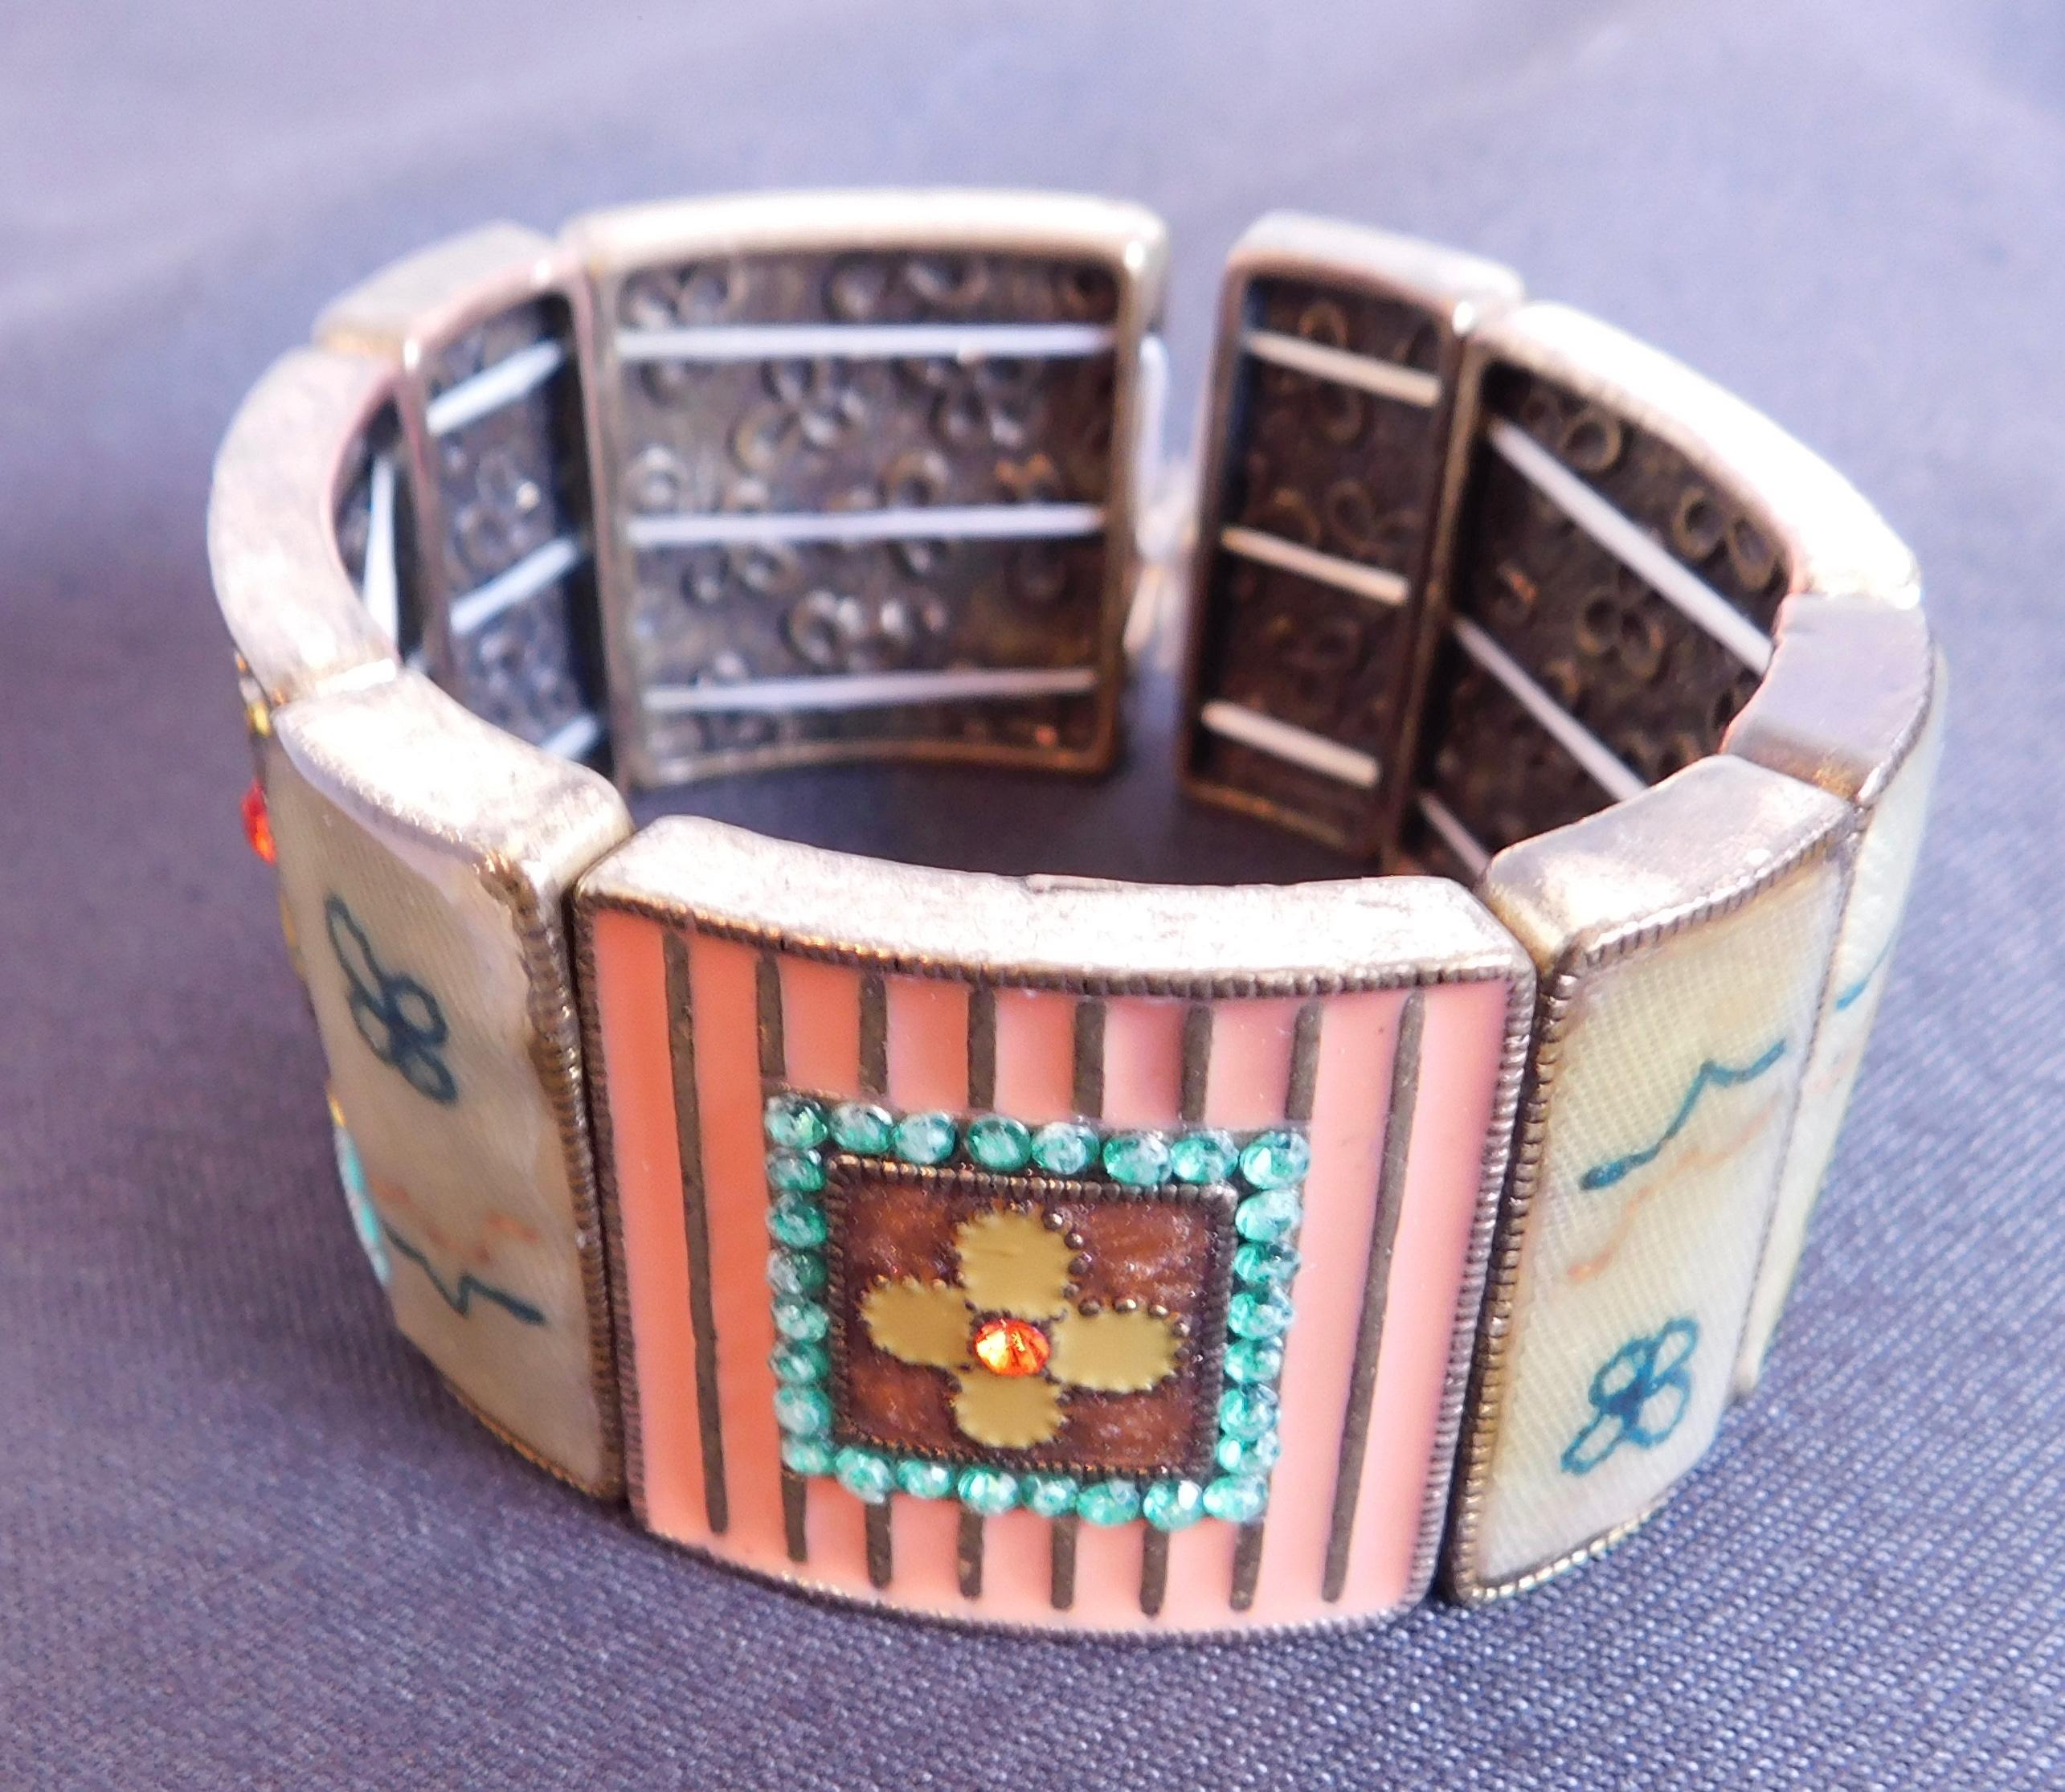 A most unique bracelet of cast metal elements decorated in cloisonné enamel ,inset with coloured rhinestones , and antique fabric fragments set under acrylic .
The pieces are joined together with elastic to allow for a stretch fit.
The actual date